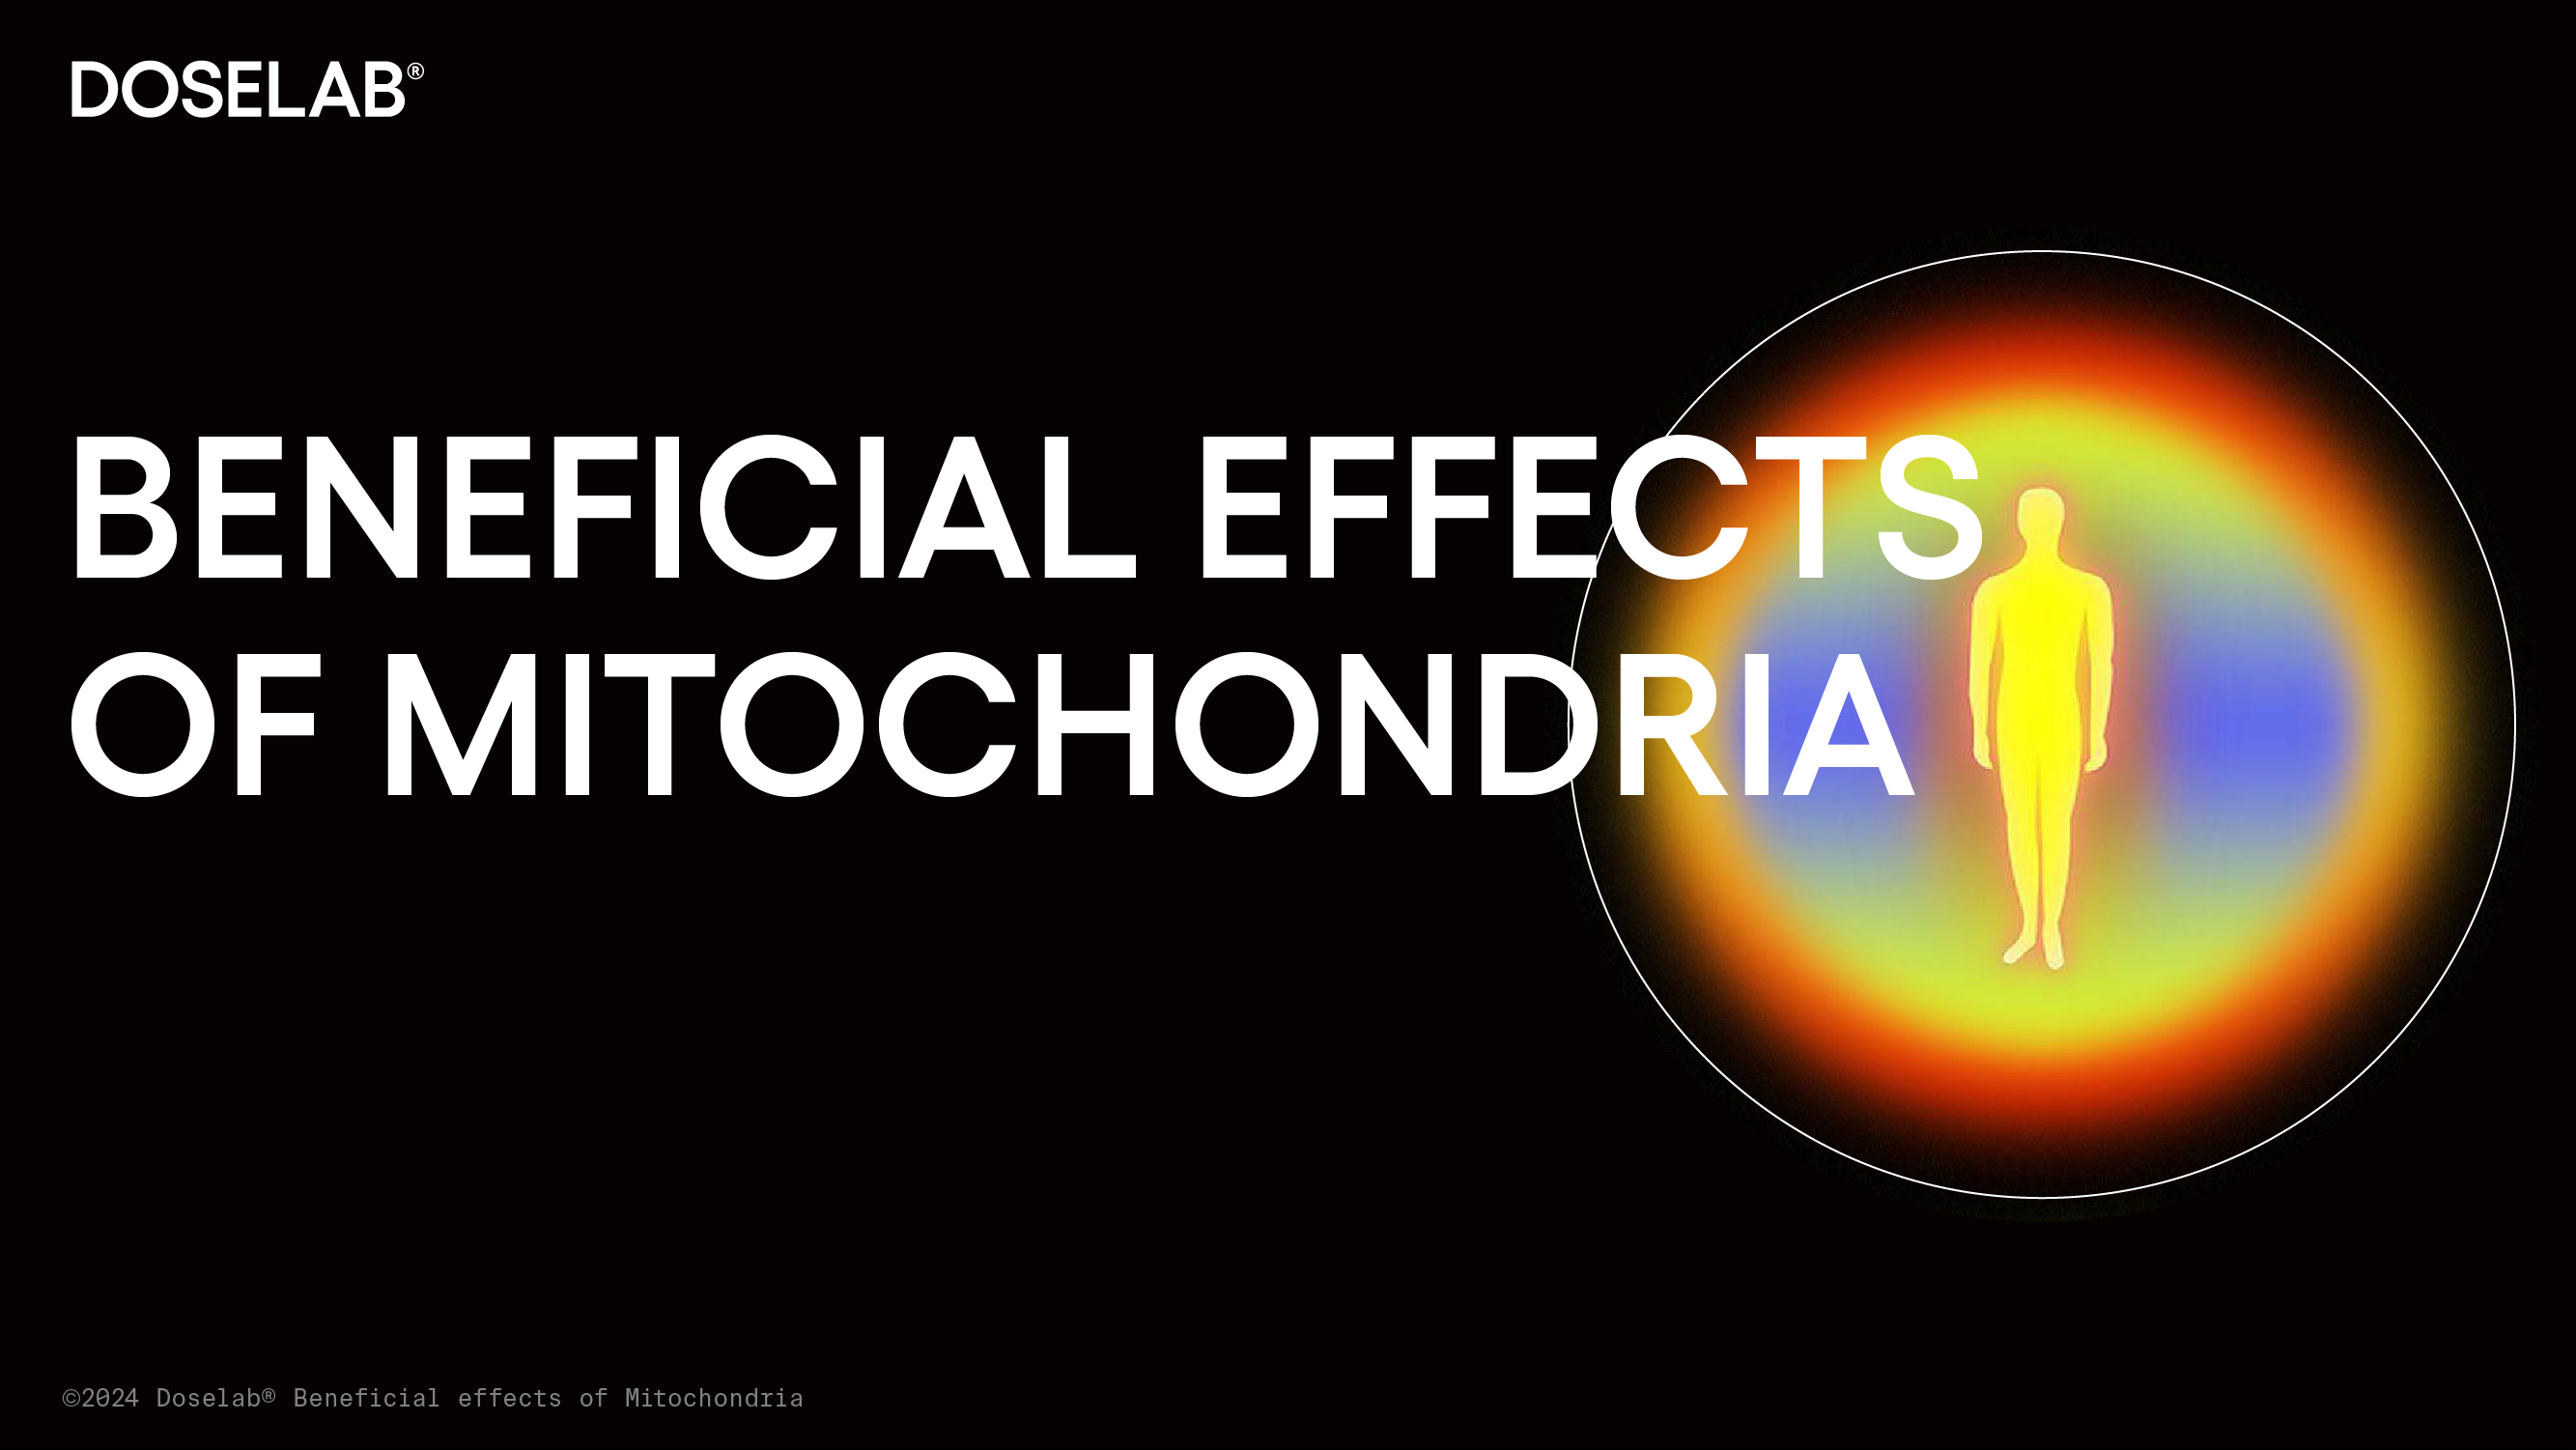 Beneficial effects of Mitochondria